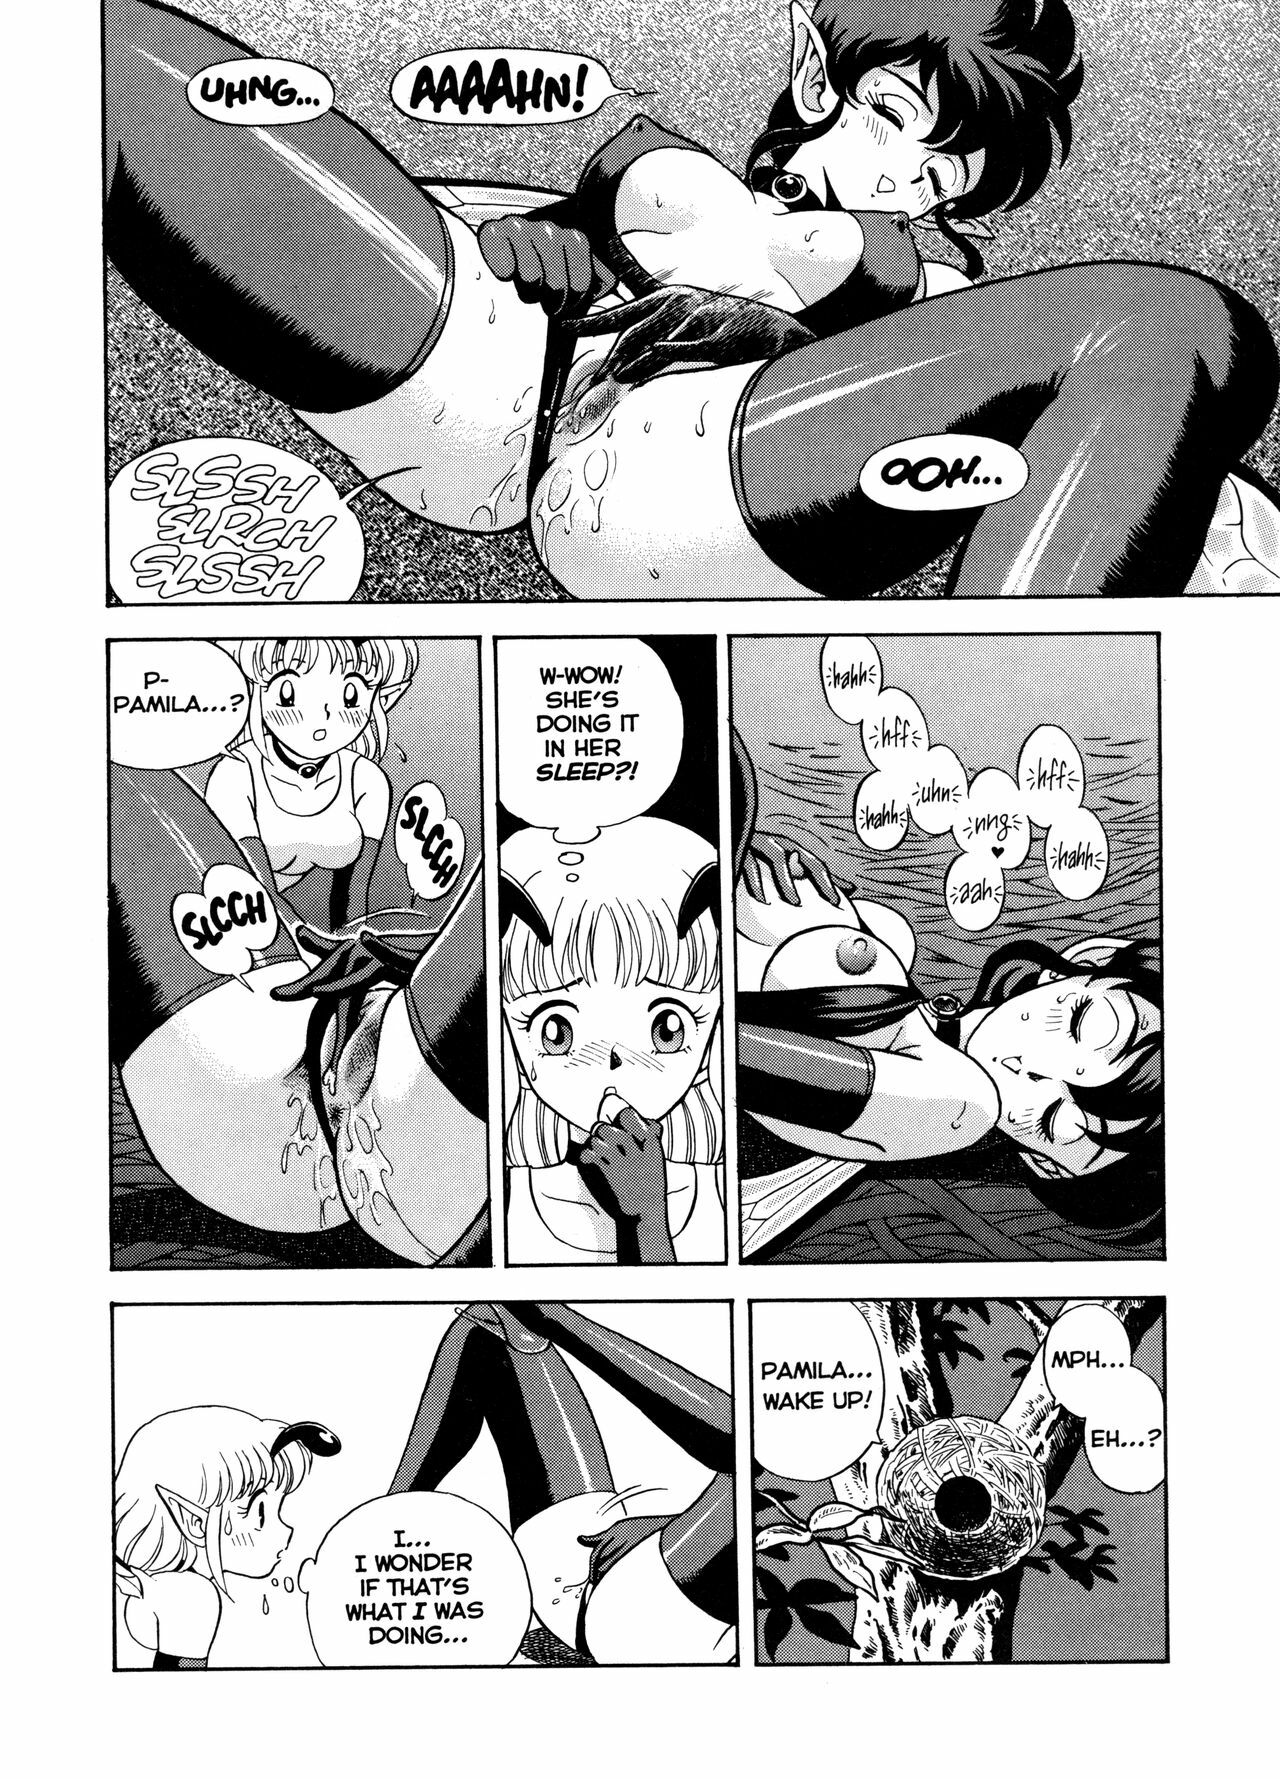 [Kondom] The New Bondage Fairies Issue 12 [ENG][Hi-Res] page 17 full